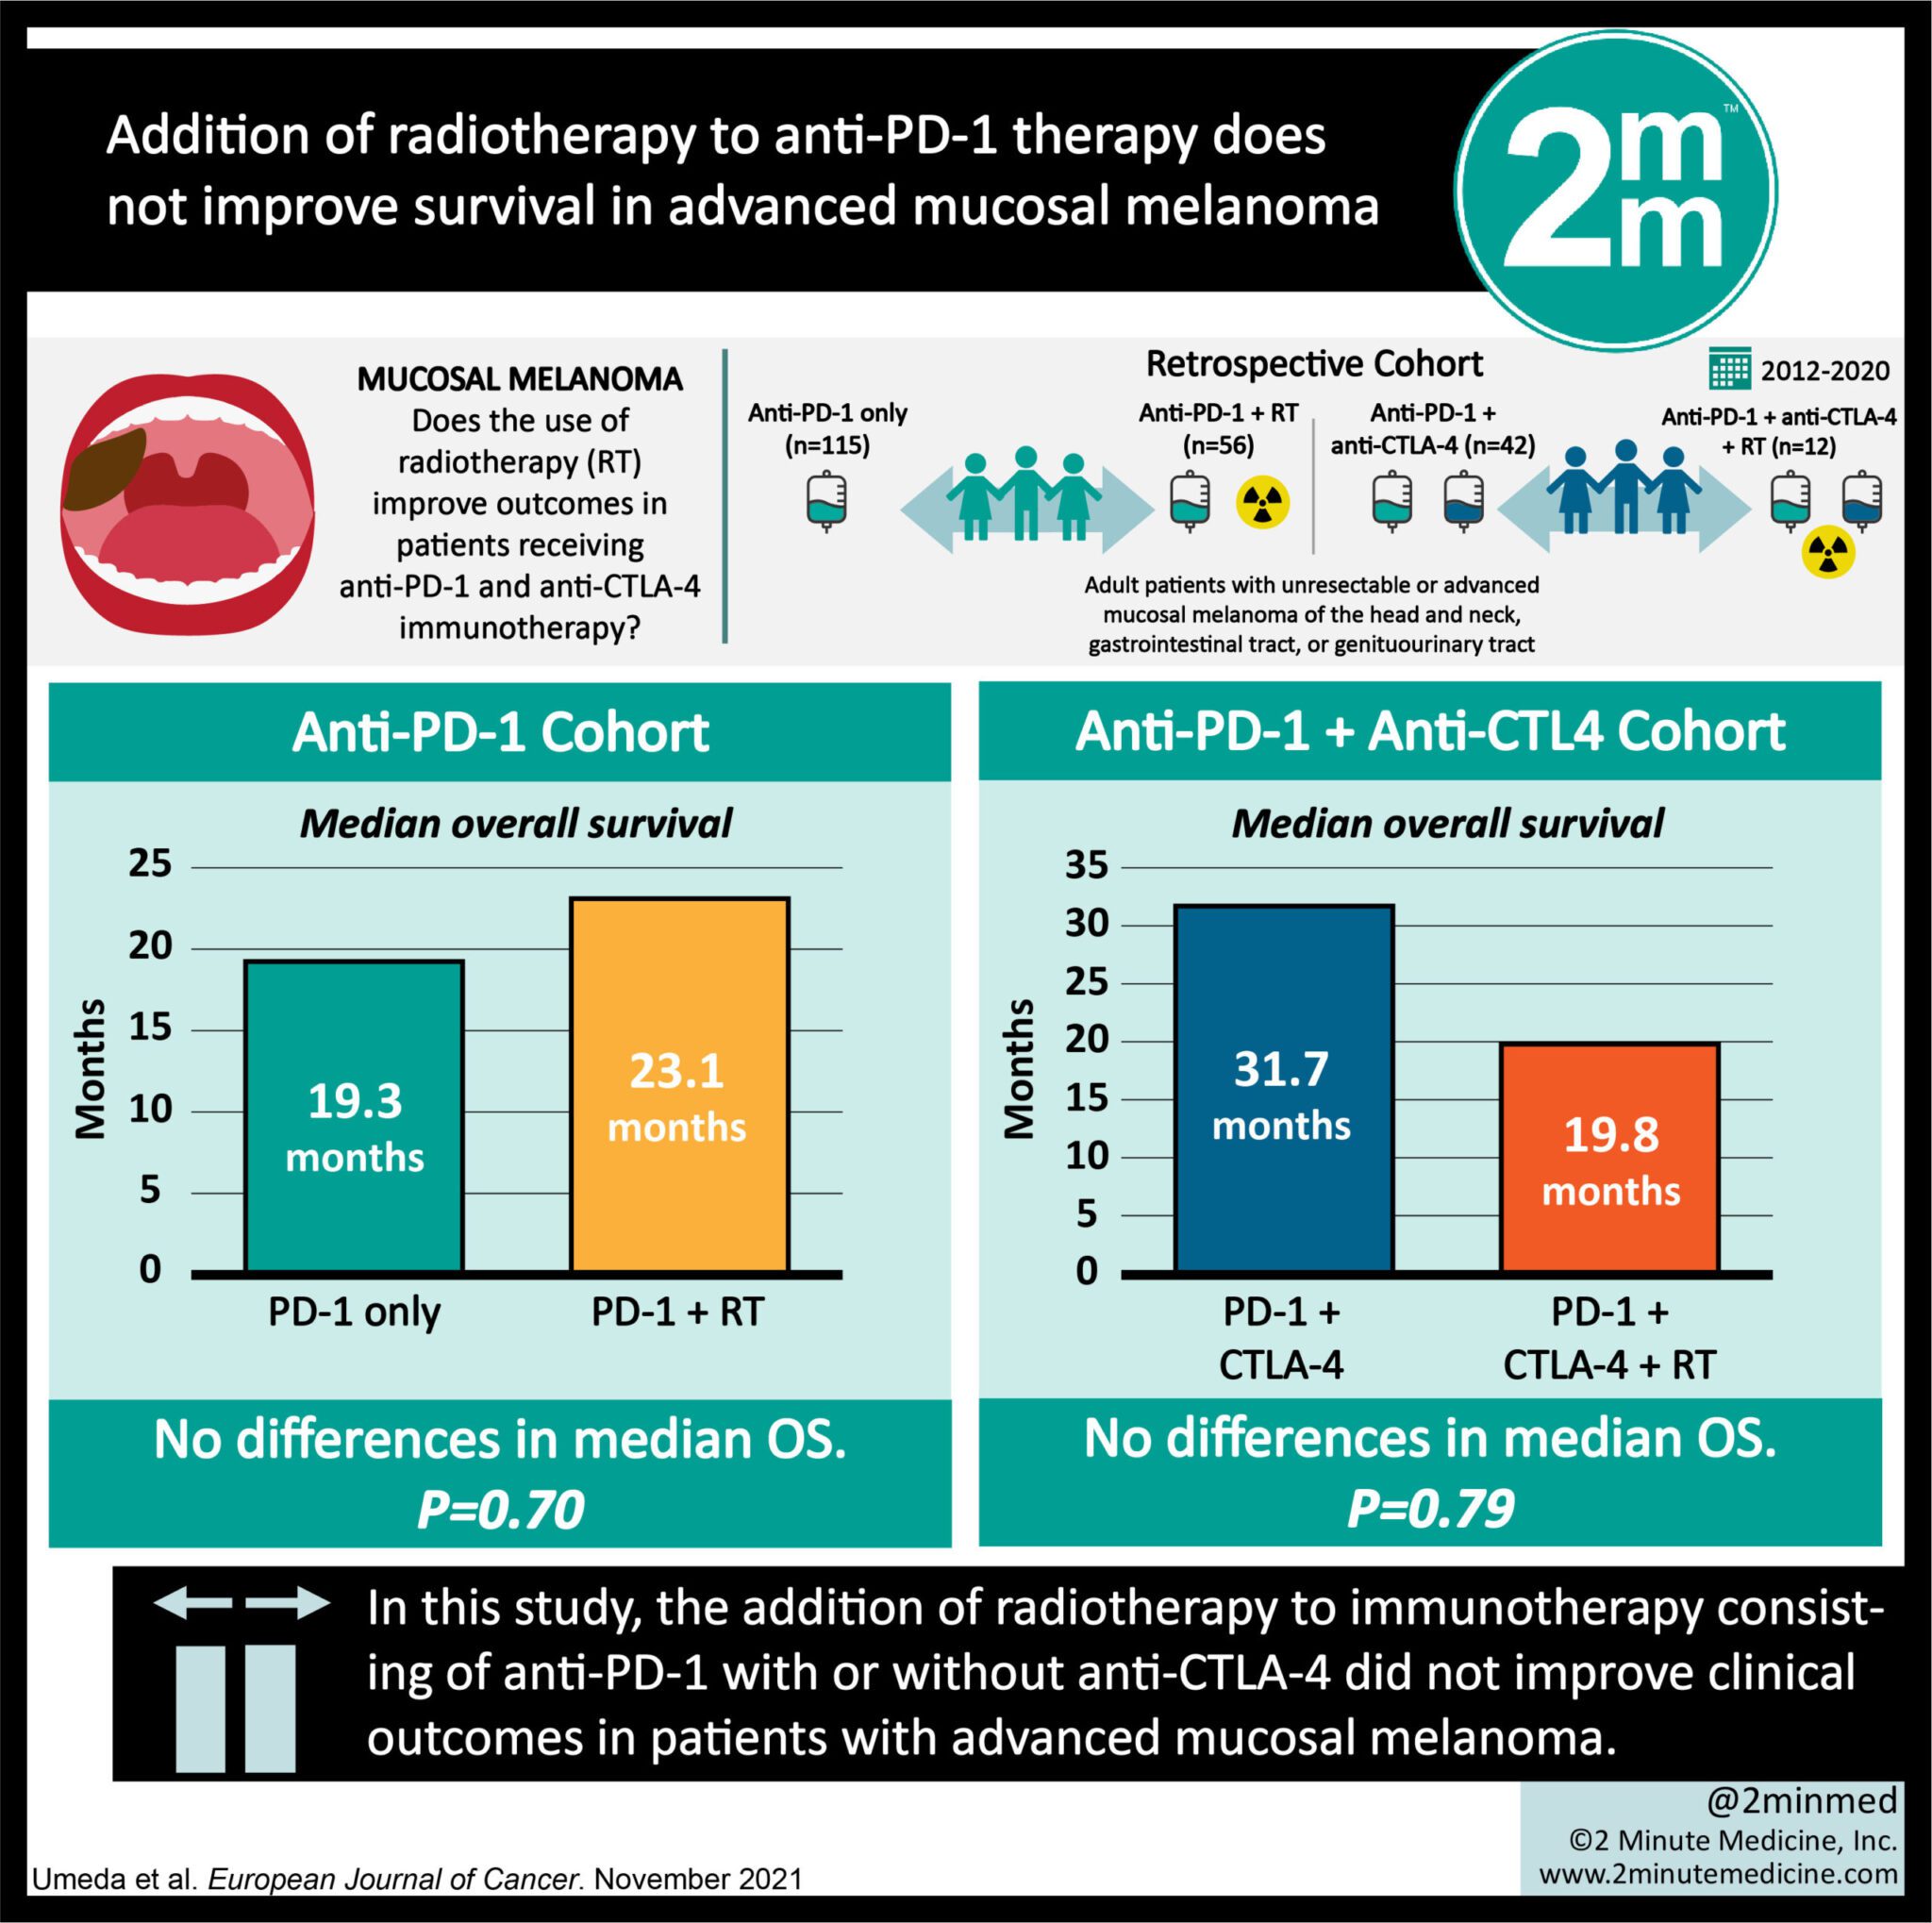 #VisualAbstract: Addition of radiotherapy to anti-PD-1 therapy does not improve survival in advanced mucosal melanoma